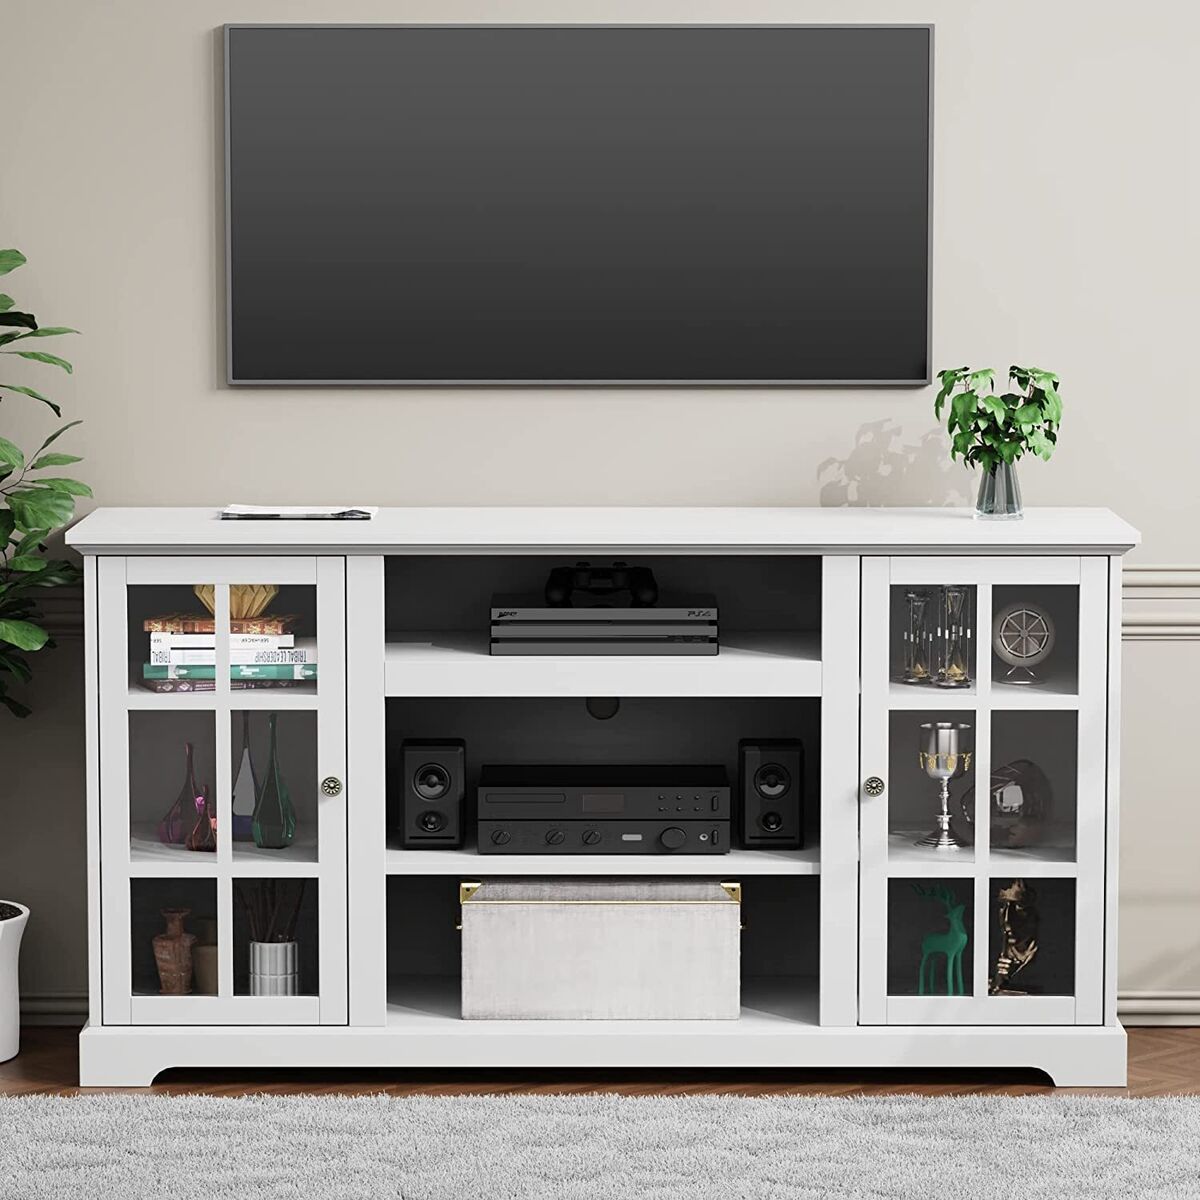 Farmhouse Tv Stand For Tv'S Up To 65" Entertainment Center W/ Storage  Shelves | Ebay Regarding Farmhouse Stands With Shelves (View 13 of 15)